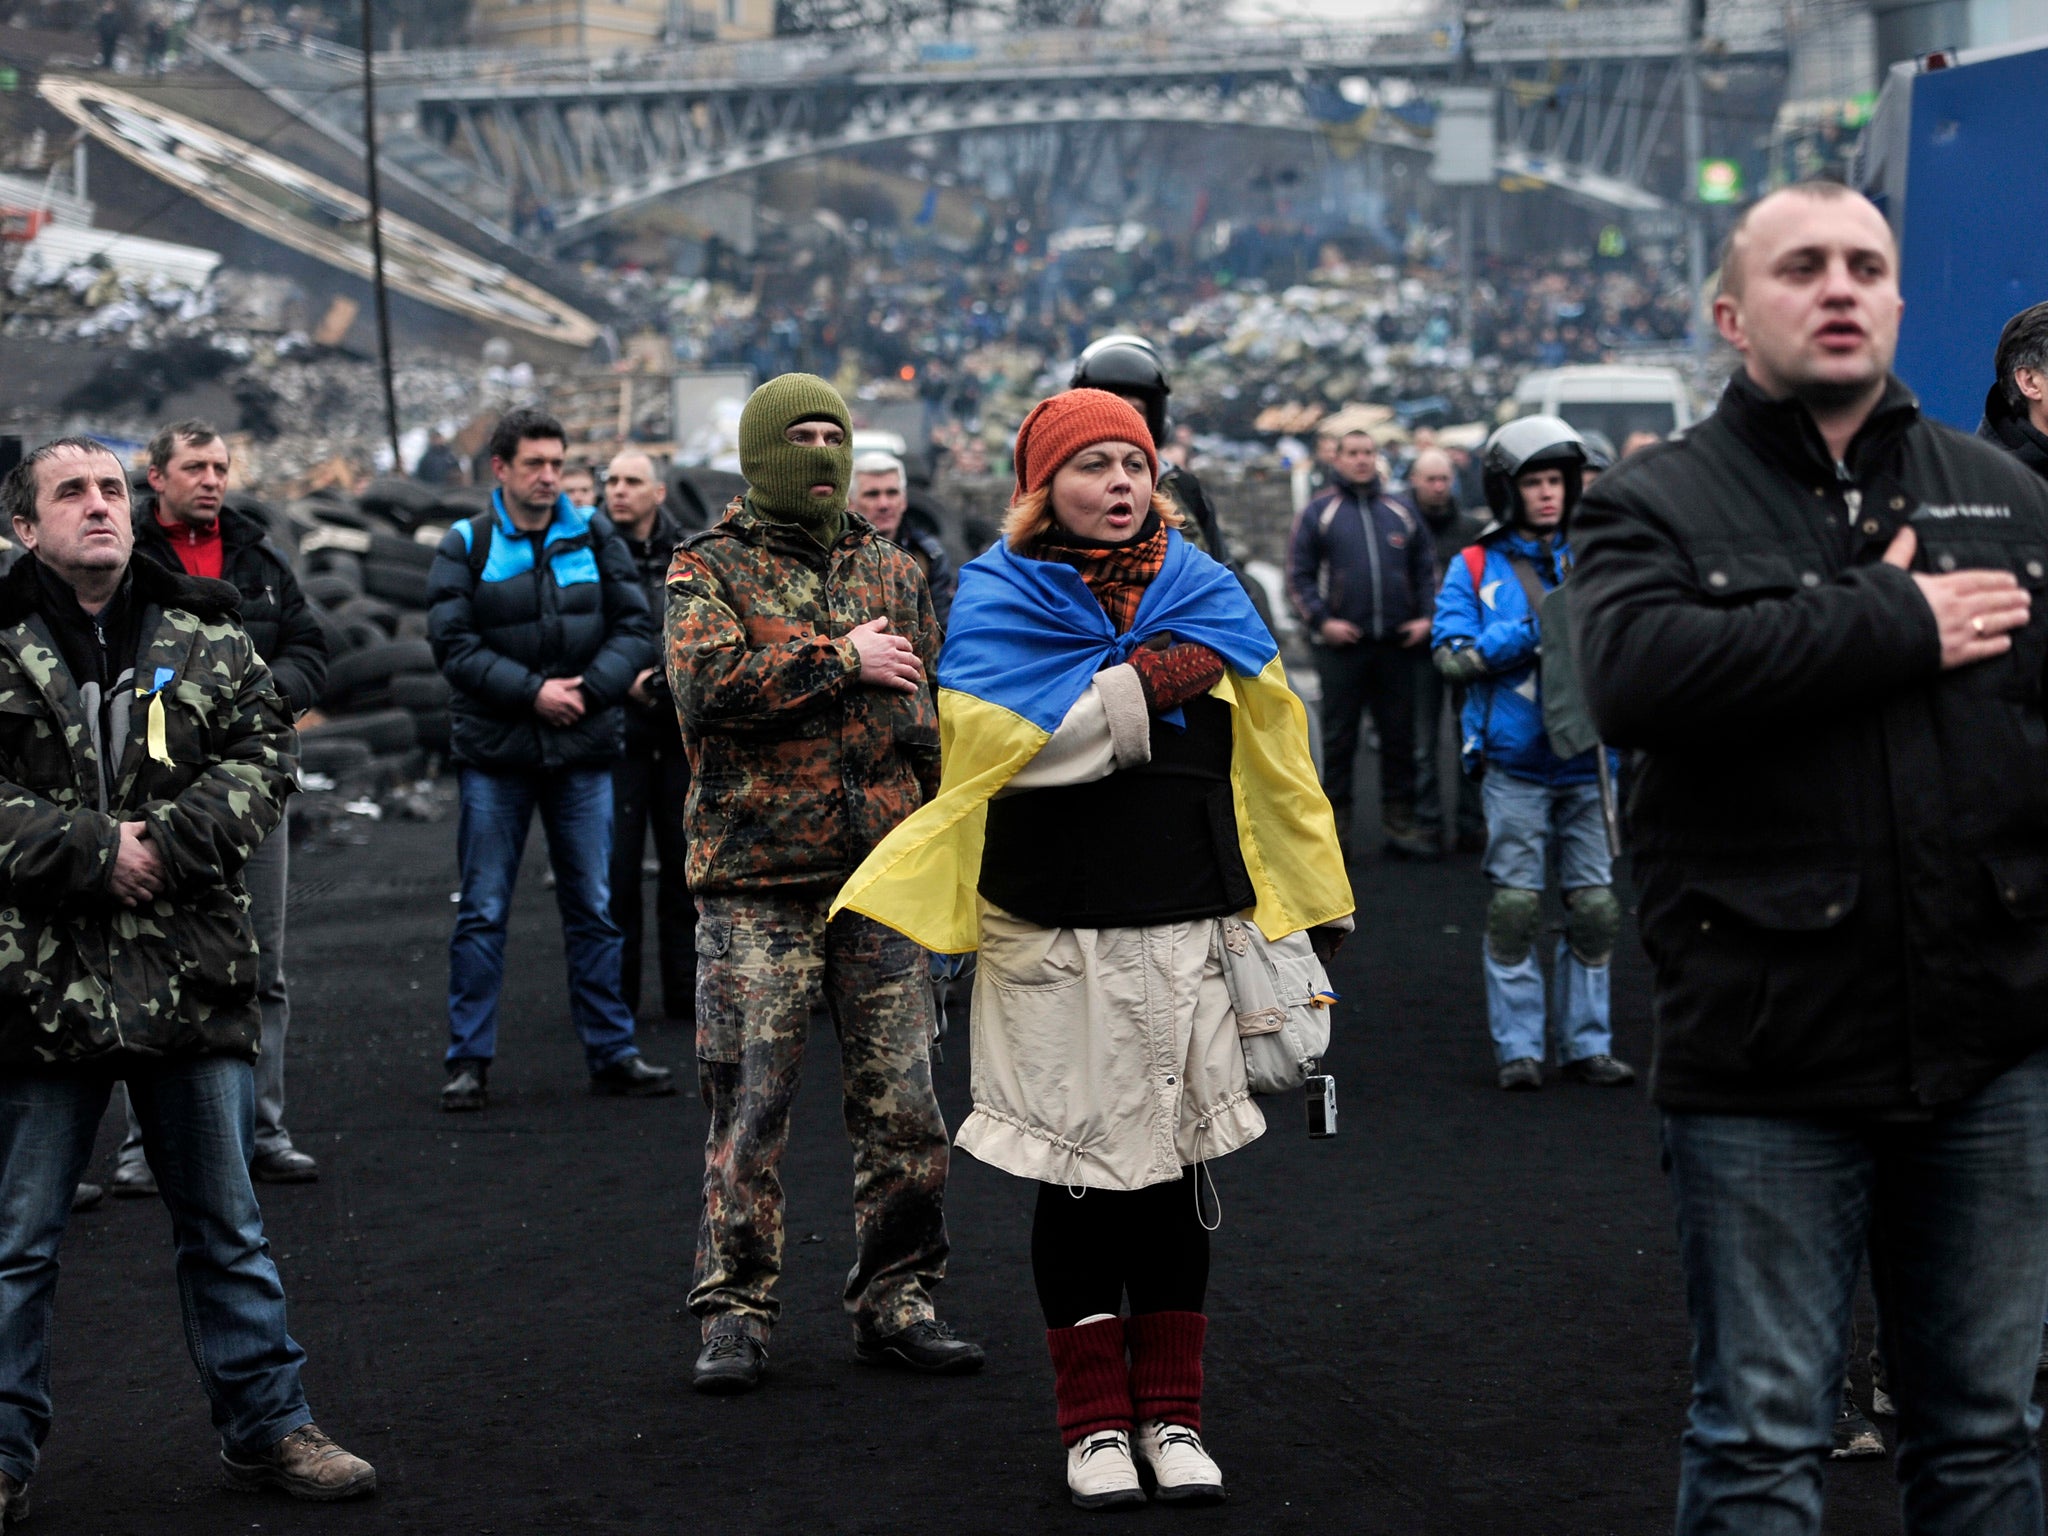 Anti-government protesters sing the Ukrainian national anthem at the Independence square in central Kiev on 22 February